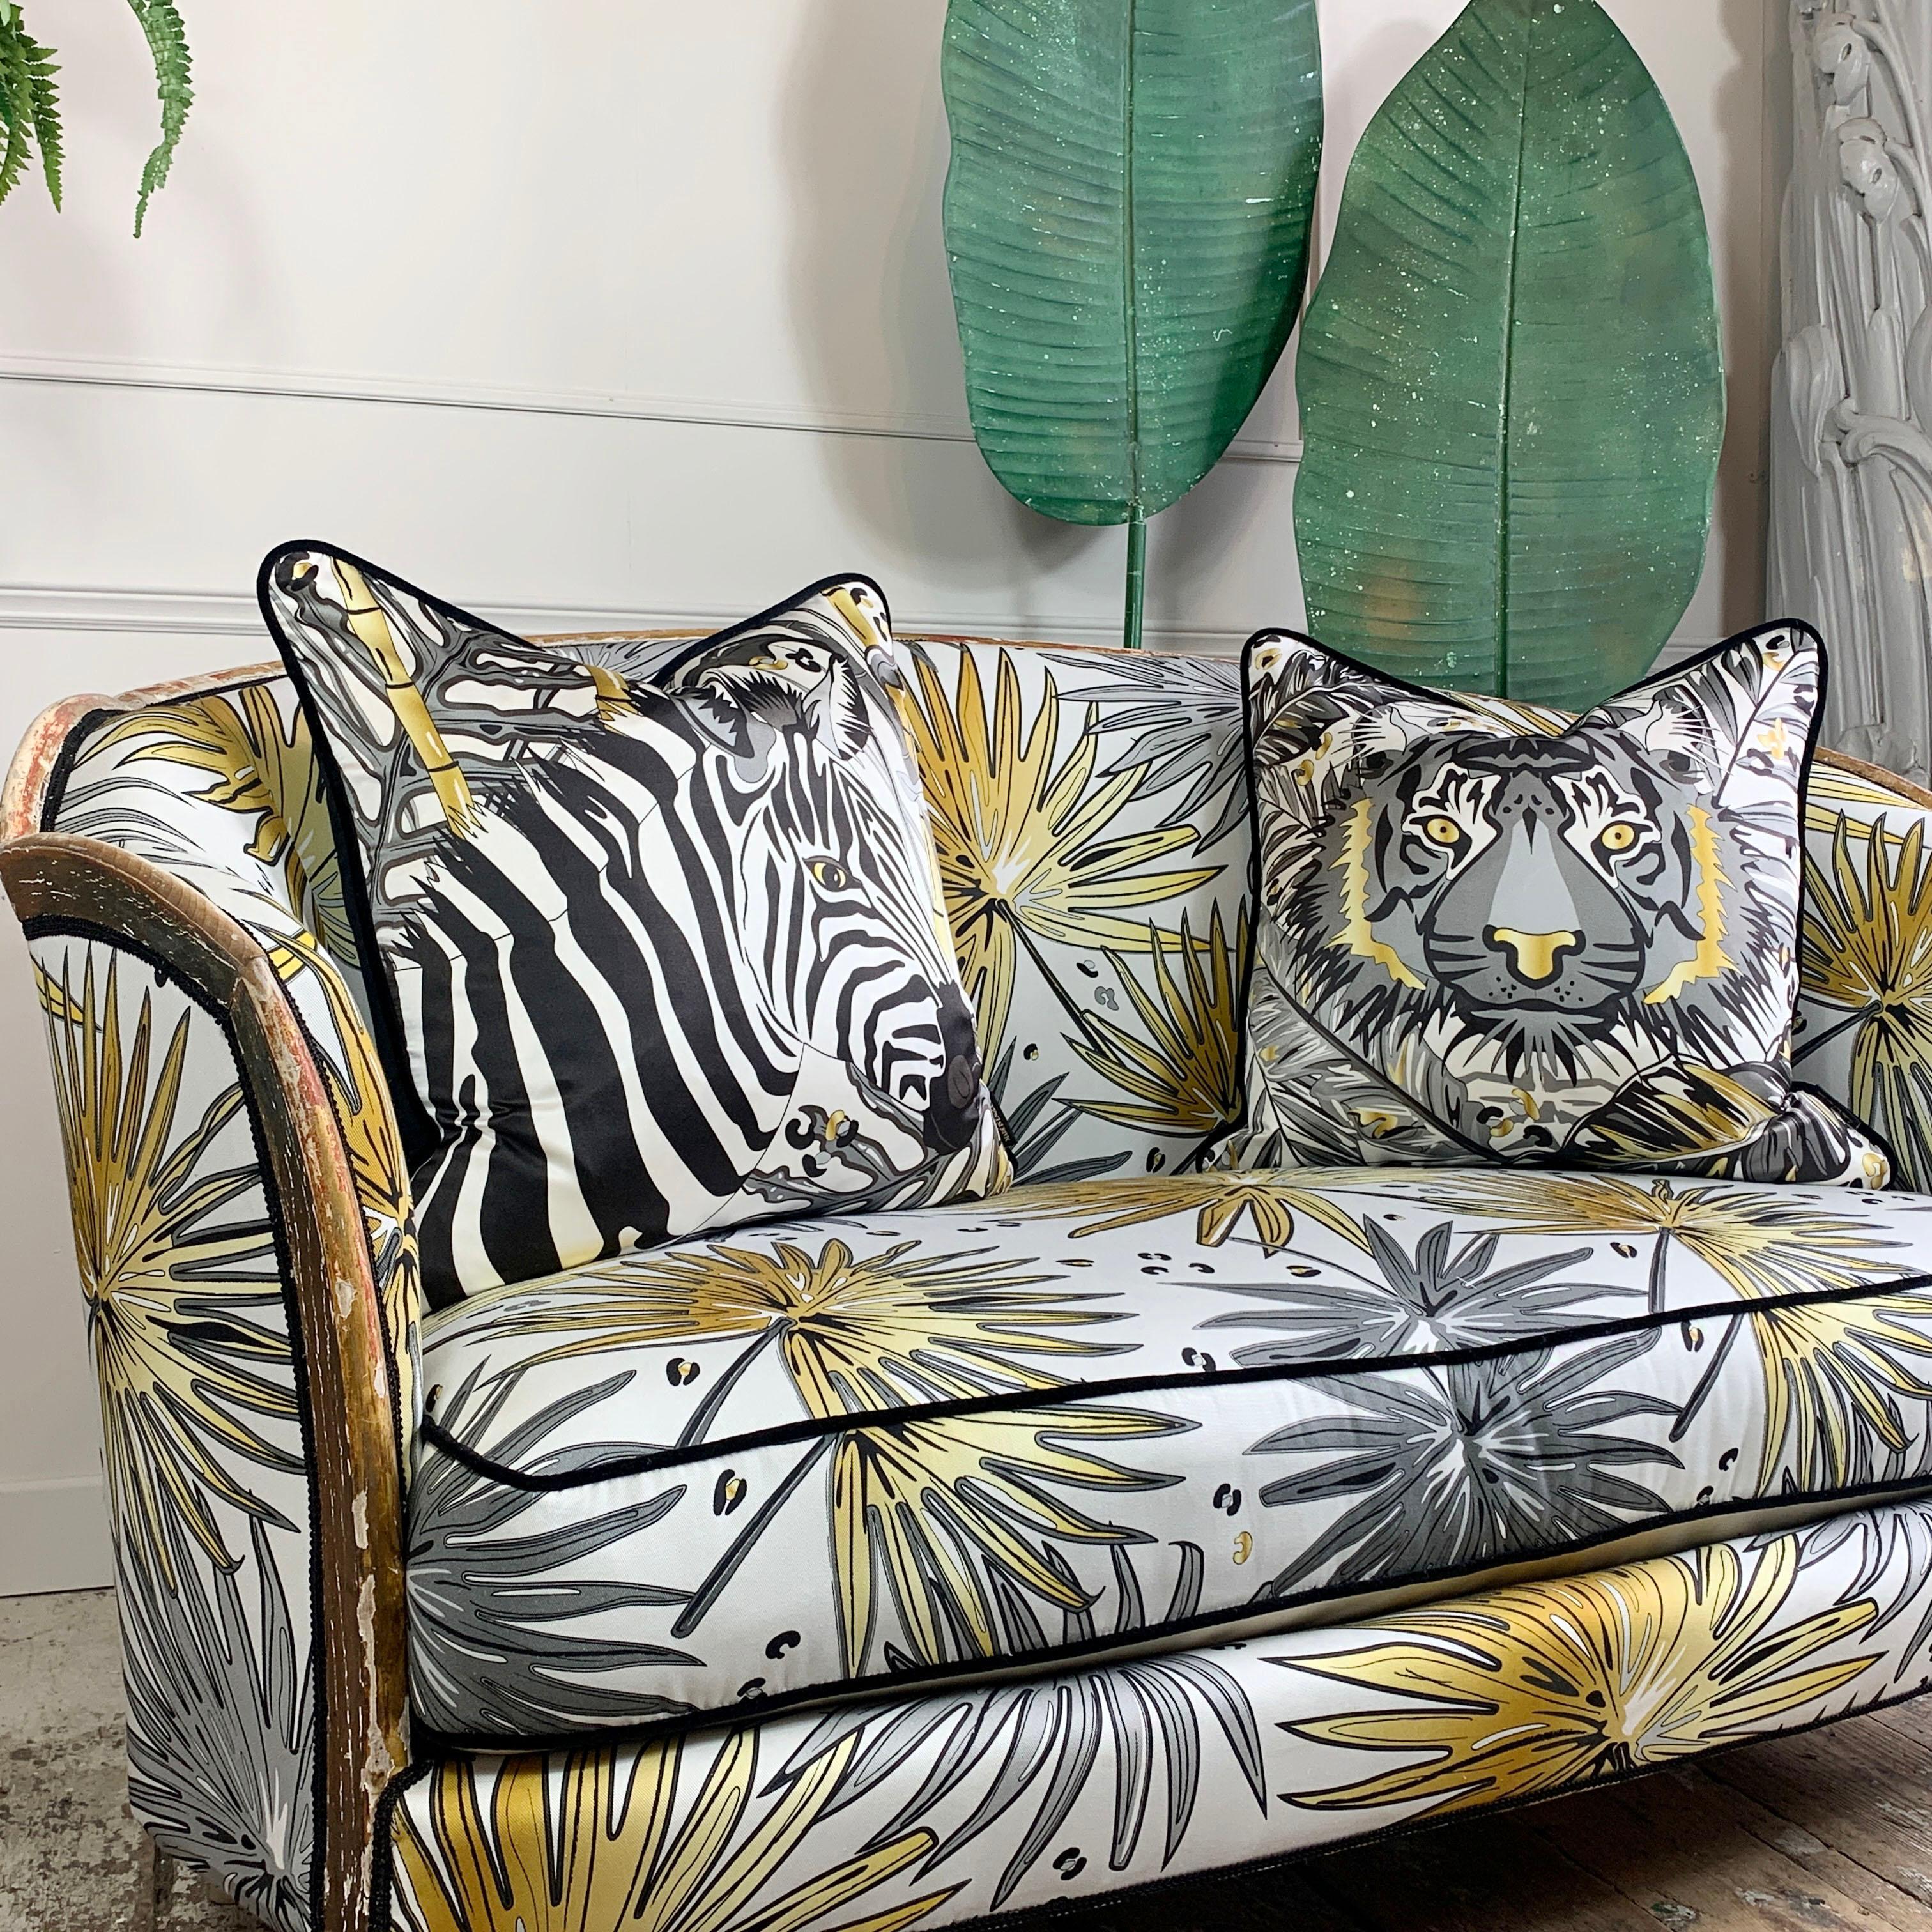 A very rare antique French Parlour Settee, upholstered in our exclusive Tropics 'Fan Palm' fabric

This exceptional French settee dating from around 1880, has been painstakingly covered in the luxurious Fan Palm fabric from our Tropics range,